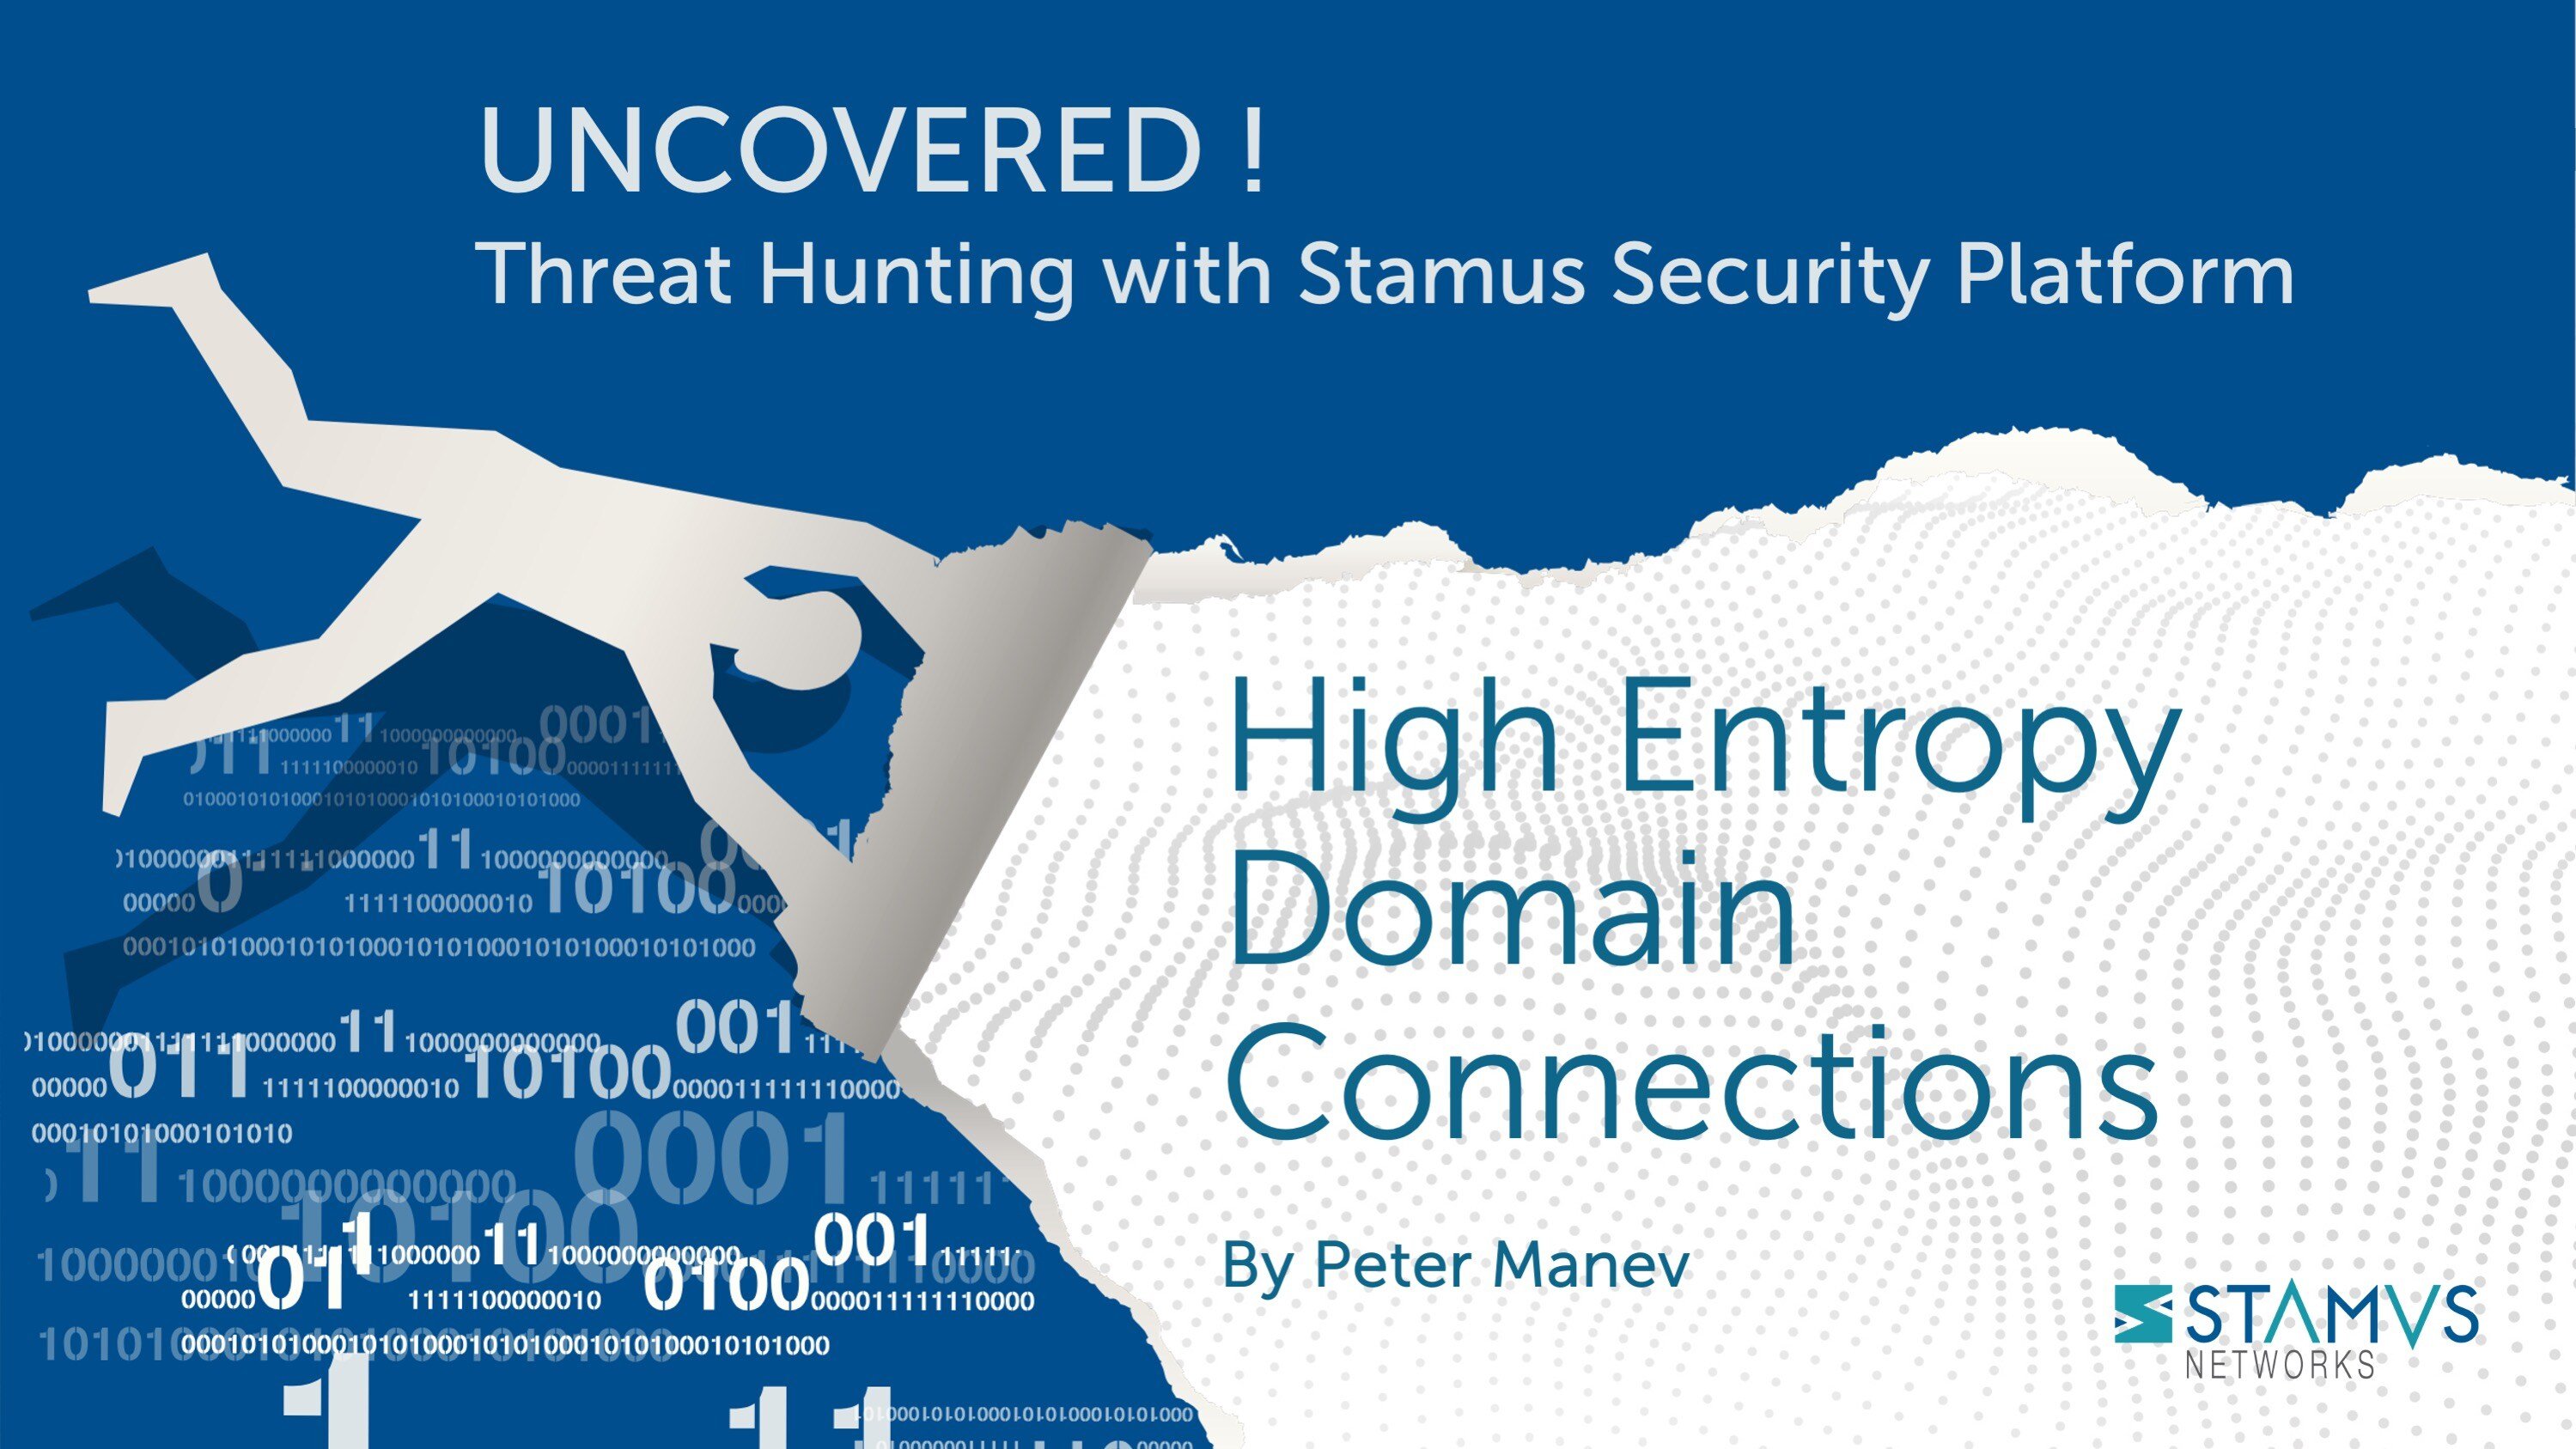 Uncovered: High Entropy Domain Connections by Peter Manev